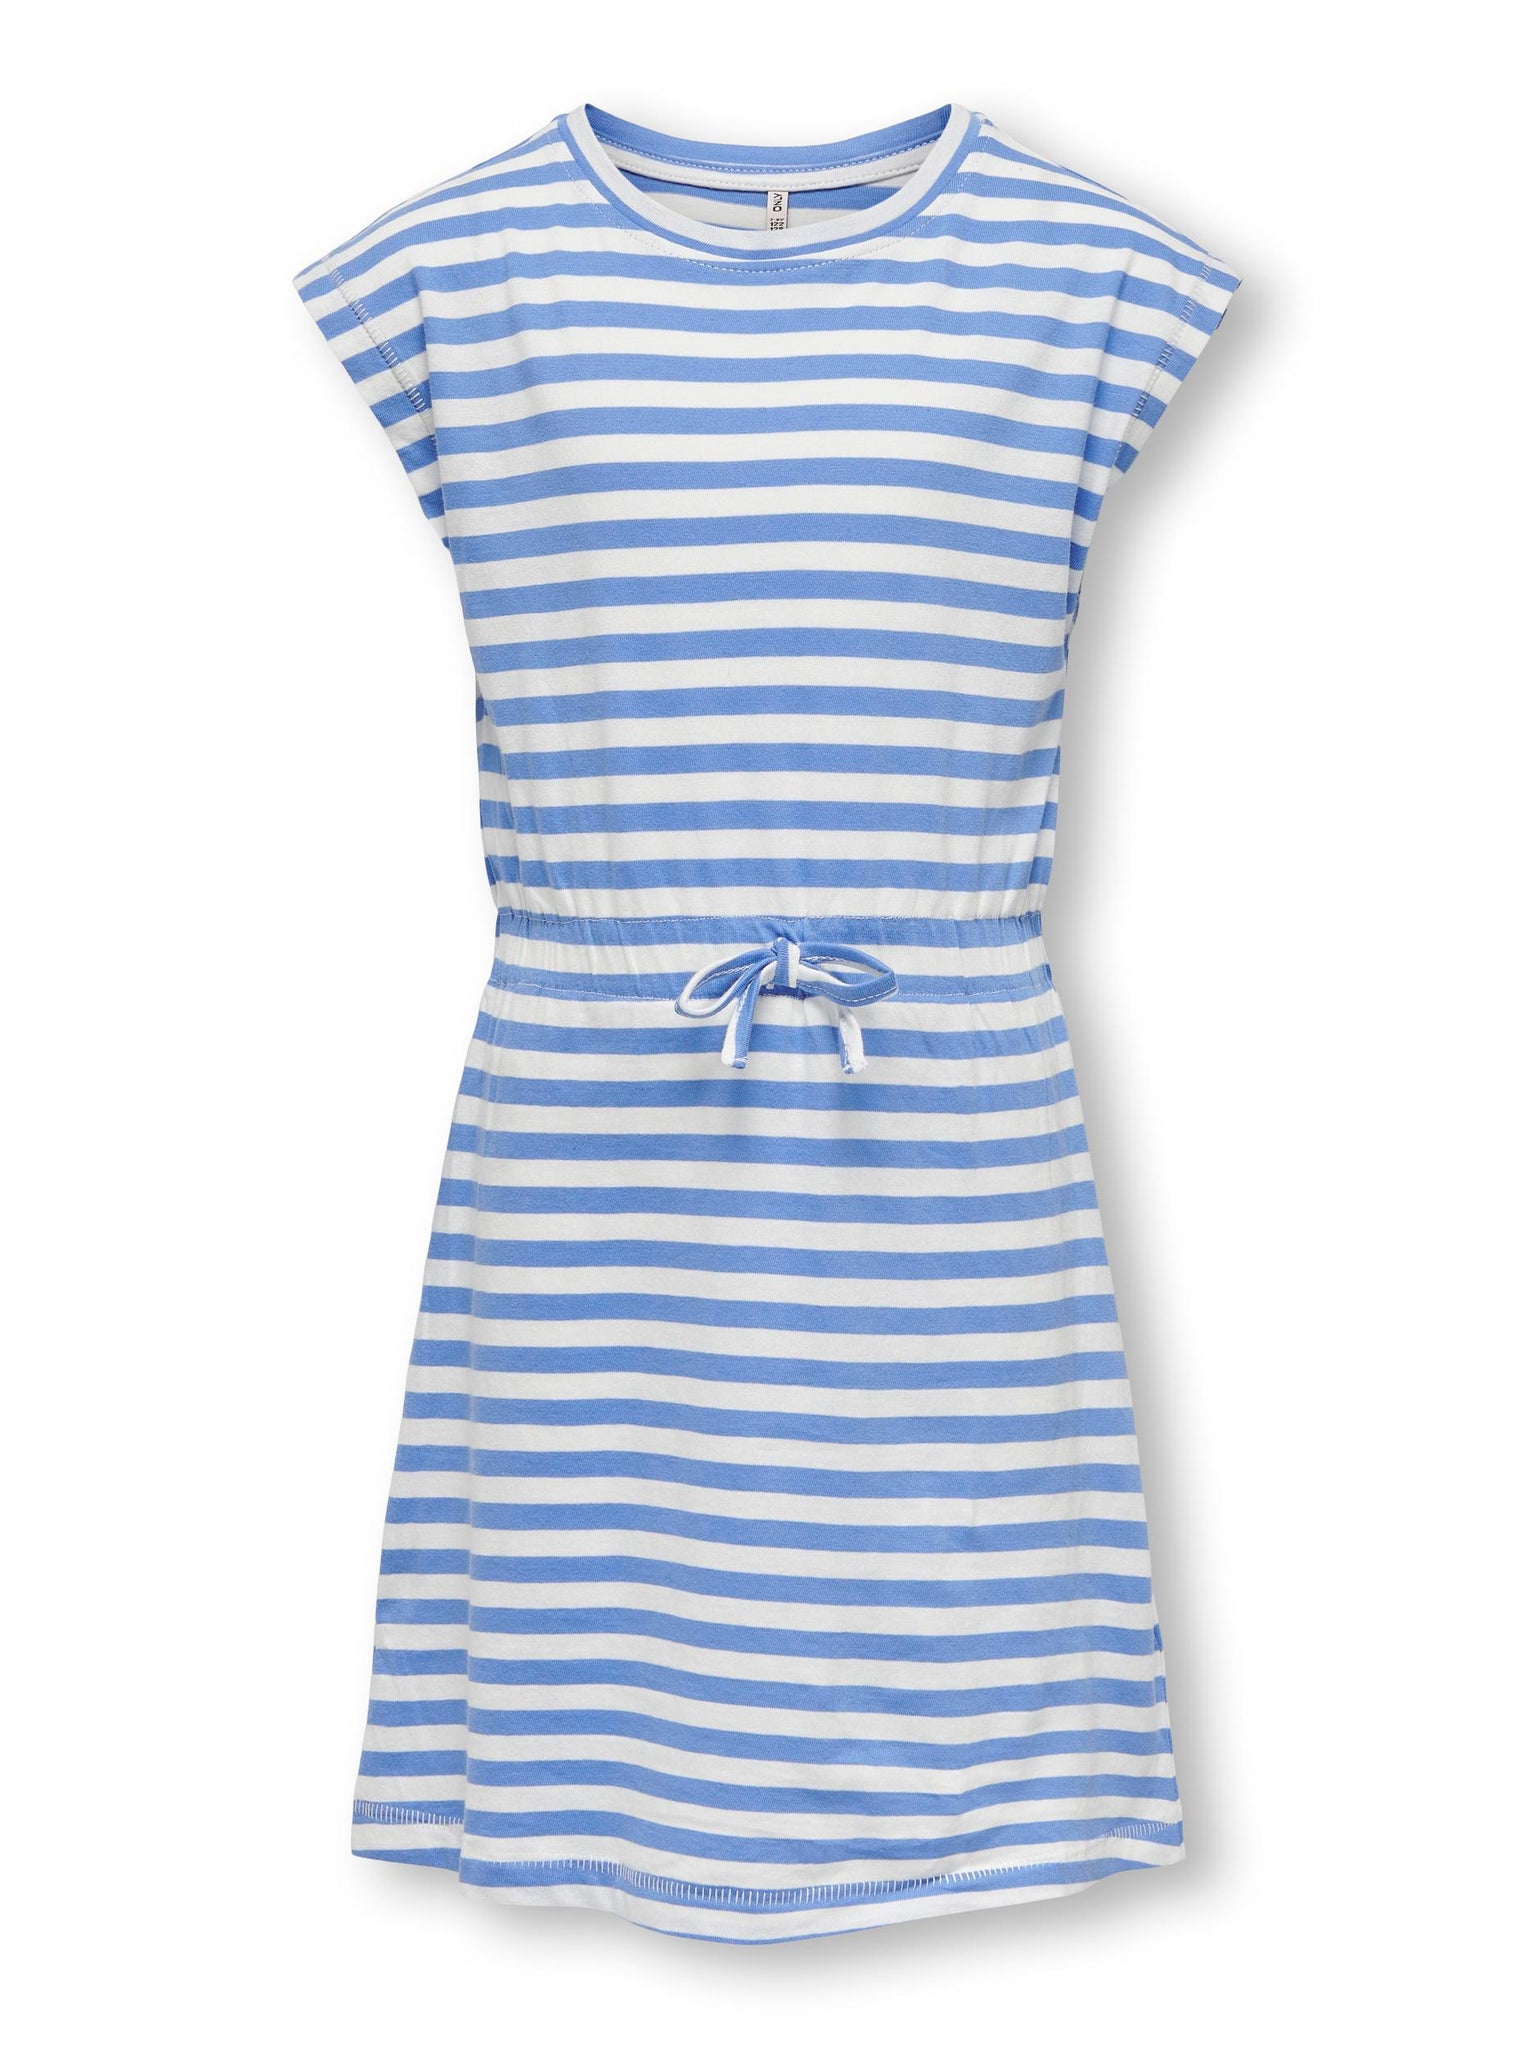 Kids Only Striped T-Shirt Dress in Blue